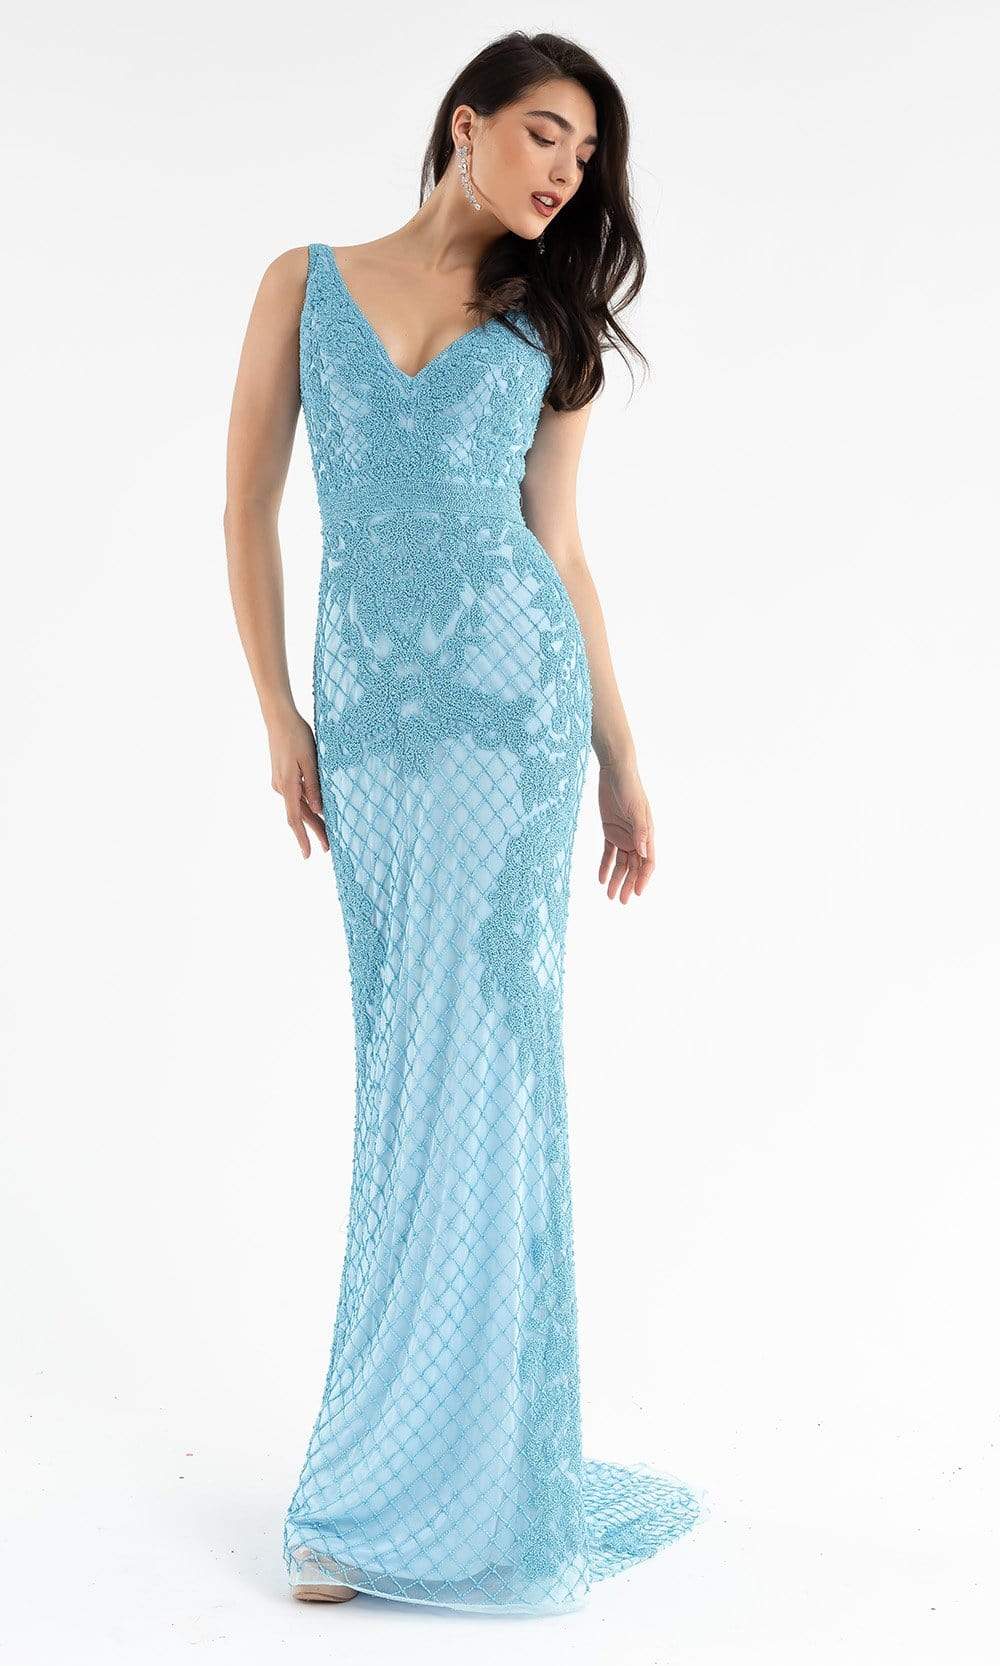 Primavera Couture - 3741 V-Neck Beaded Lace Long Gown Special Occasion Dress 00 / Light Turquoise